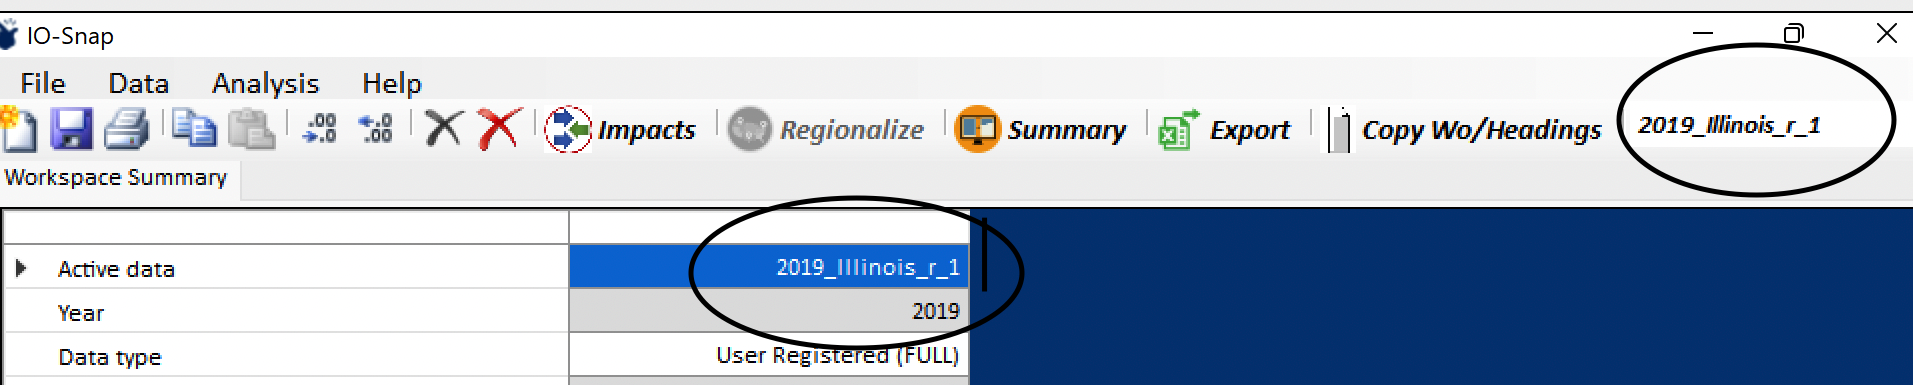 _images/New_Illinois_Accounts.png